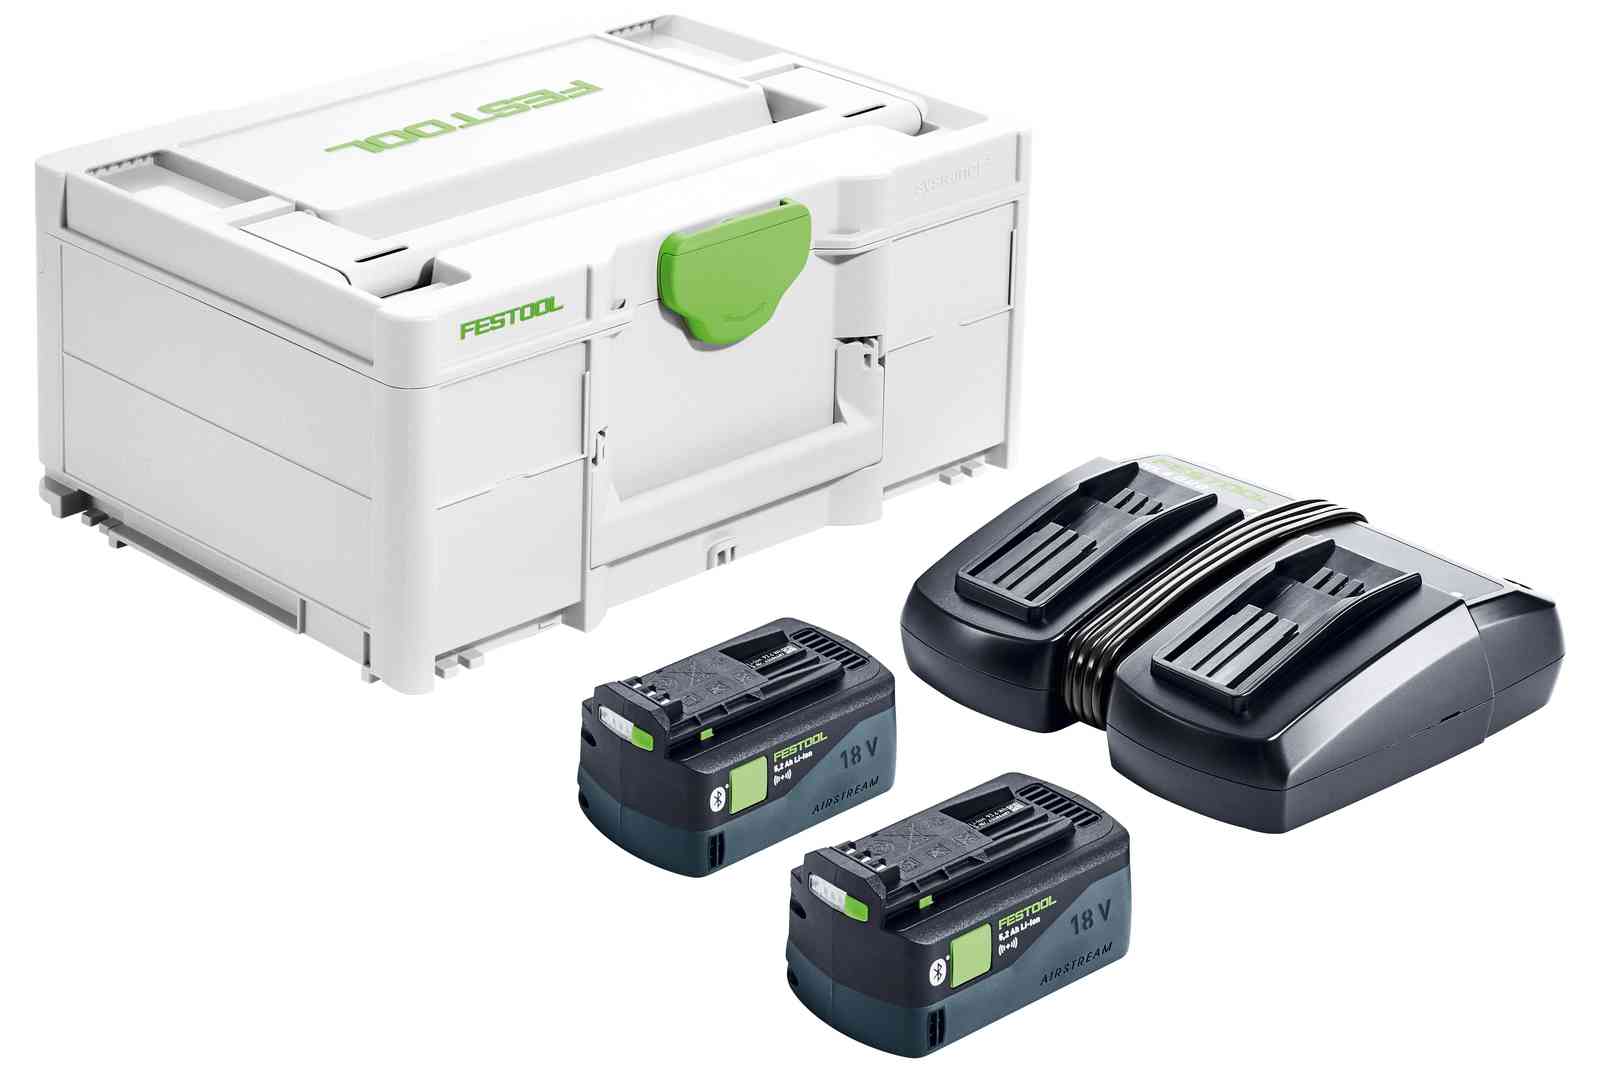 Festool Laddpaket SYS 18V 2x5,2/TCL6DUO